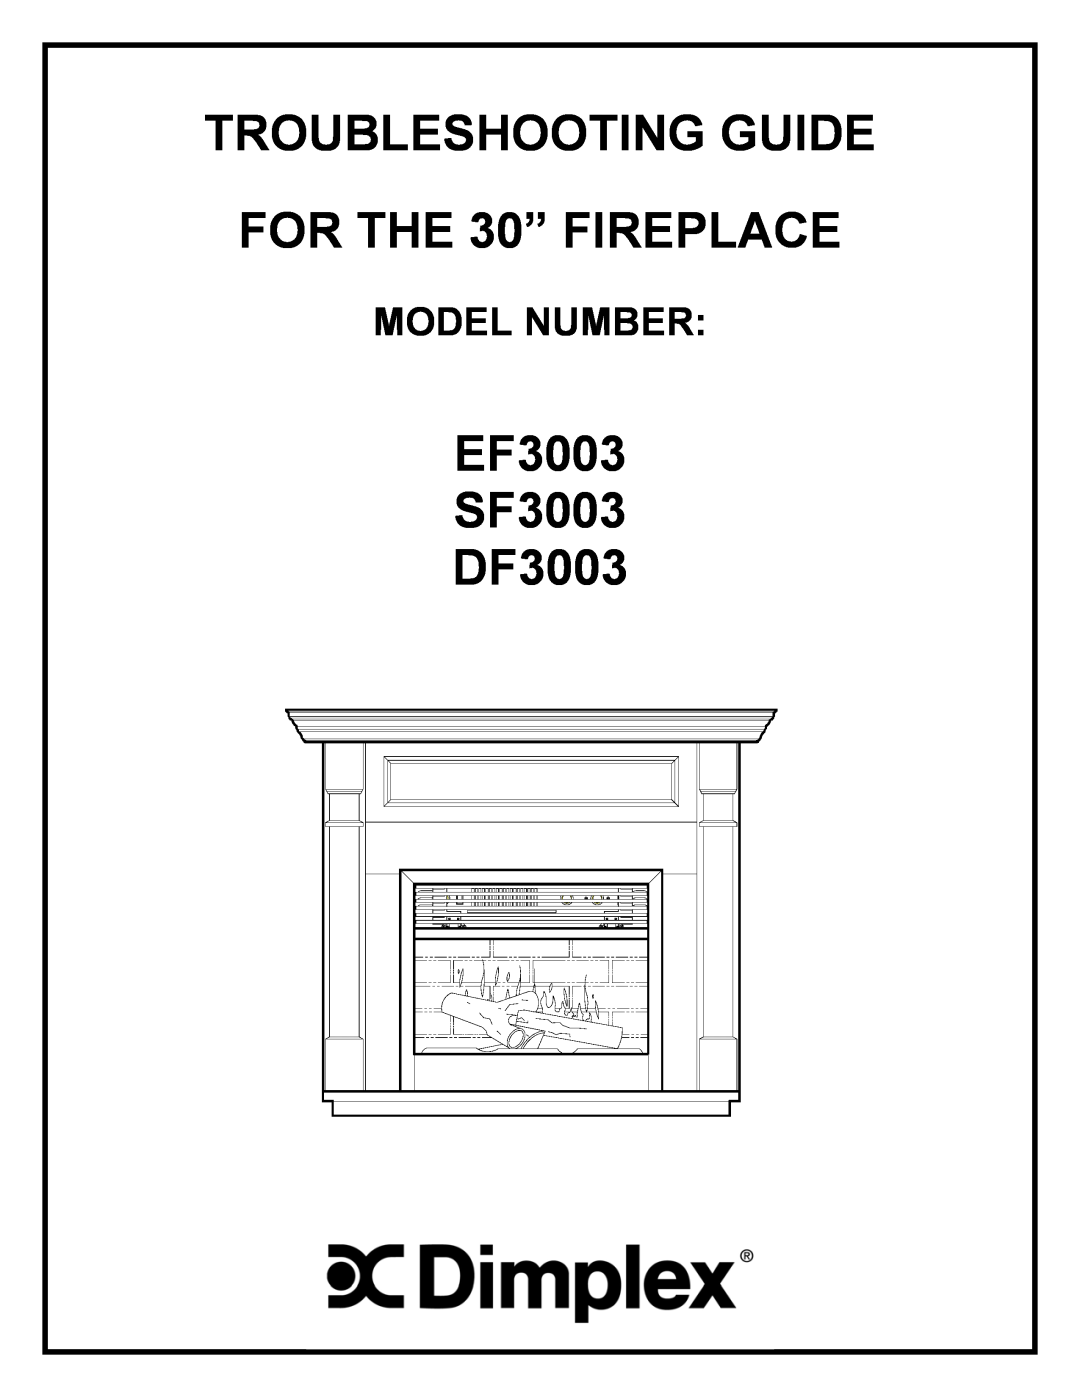 Dimplex EF3003 manual Model Number, Troubleshooting Guide, FOR THE 30” FIREPLACE, SF3003, DF3003 